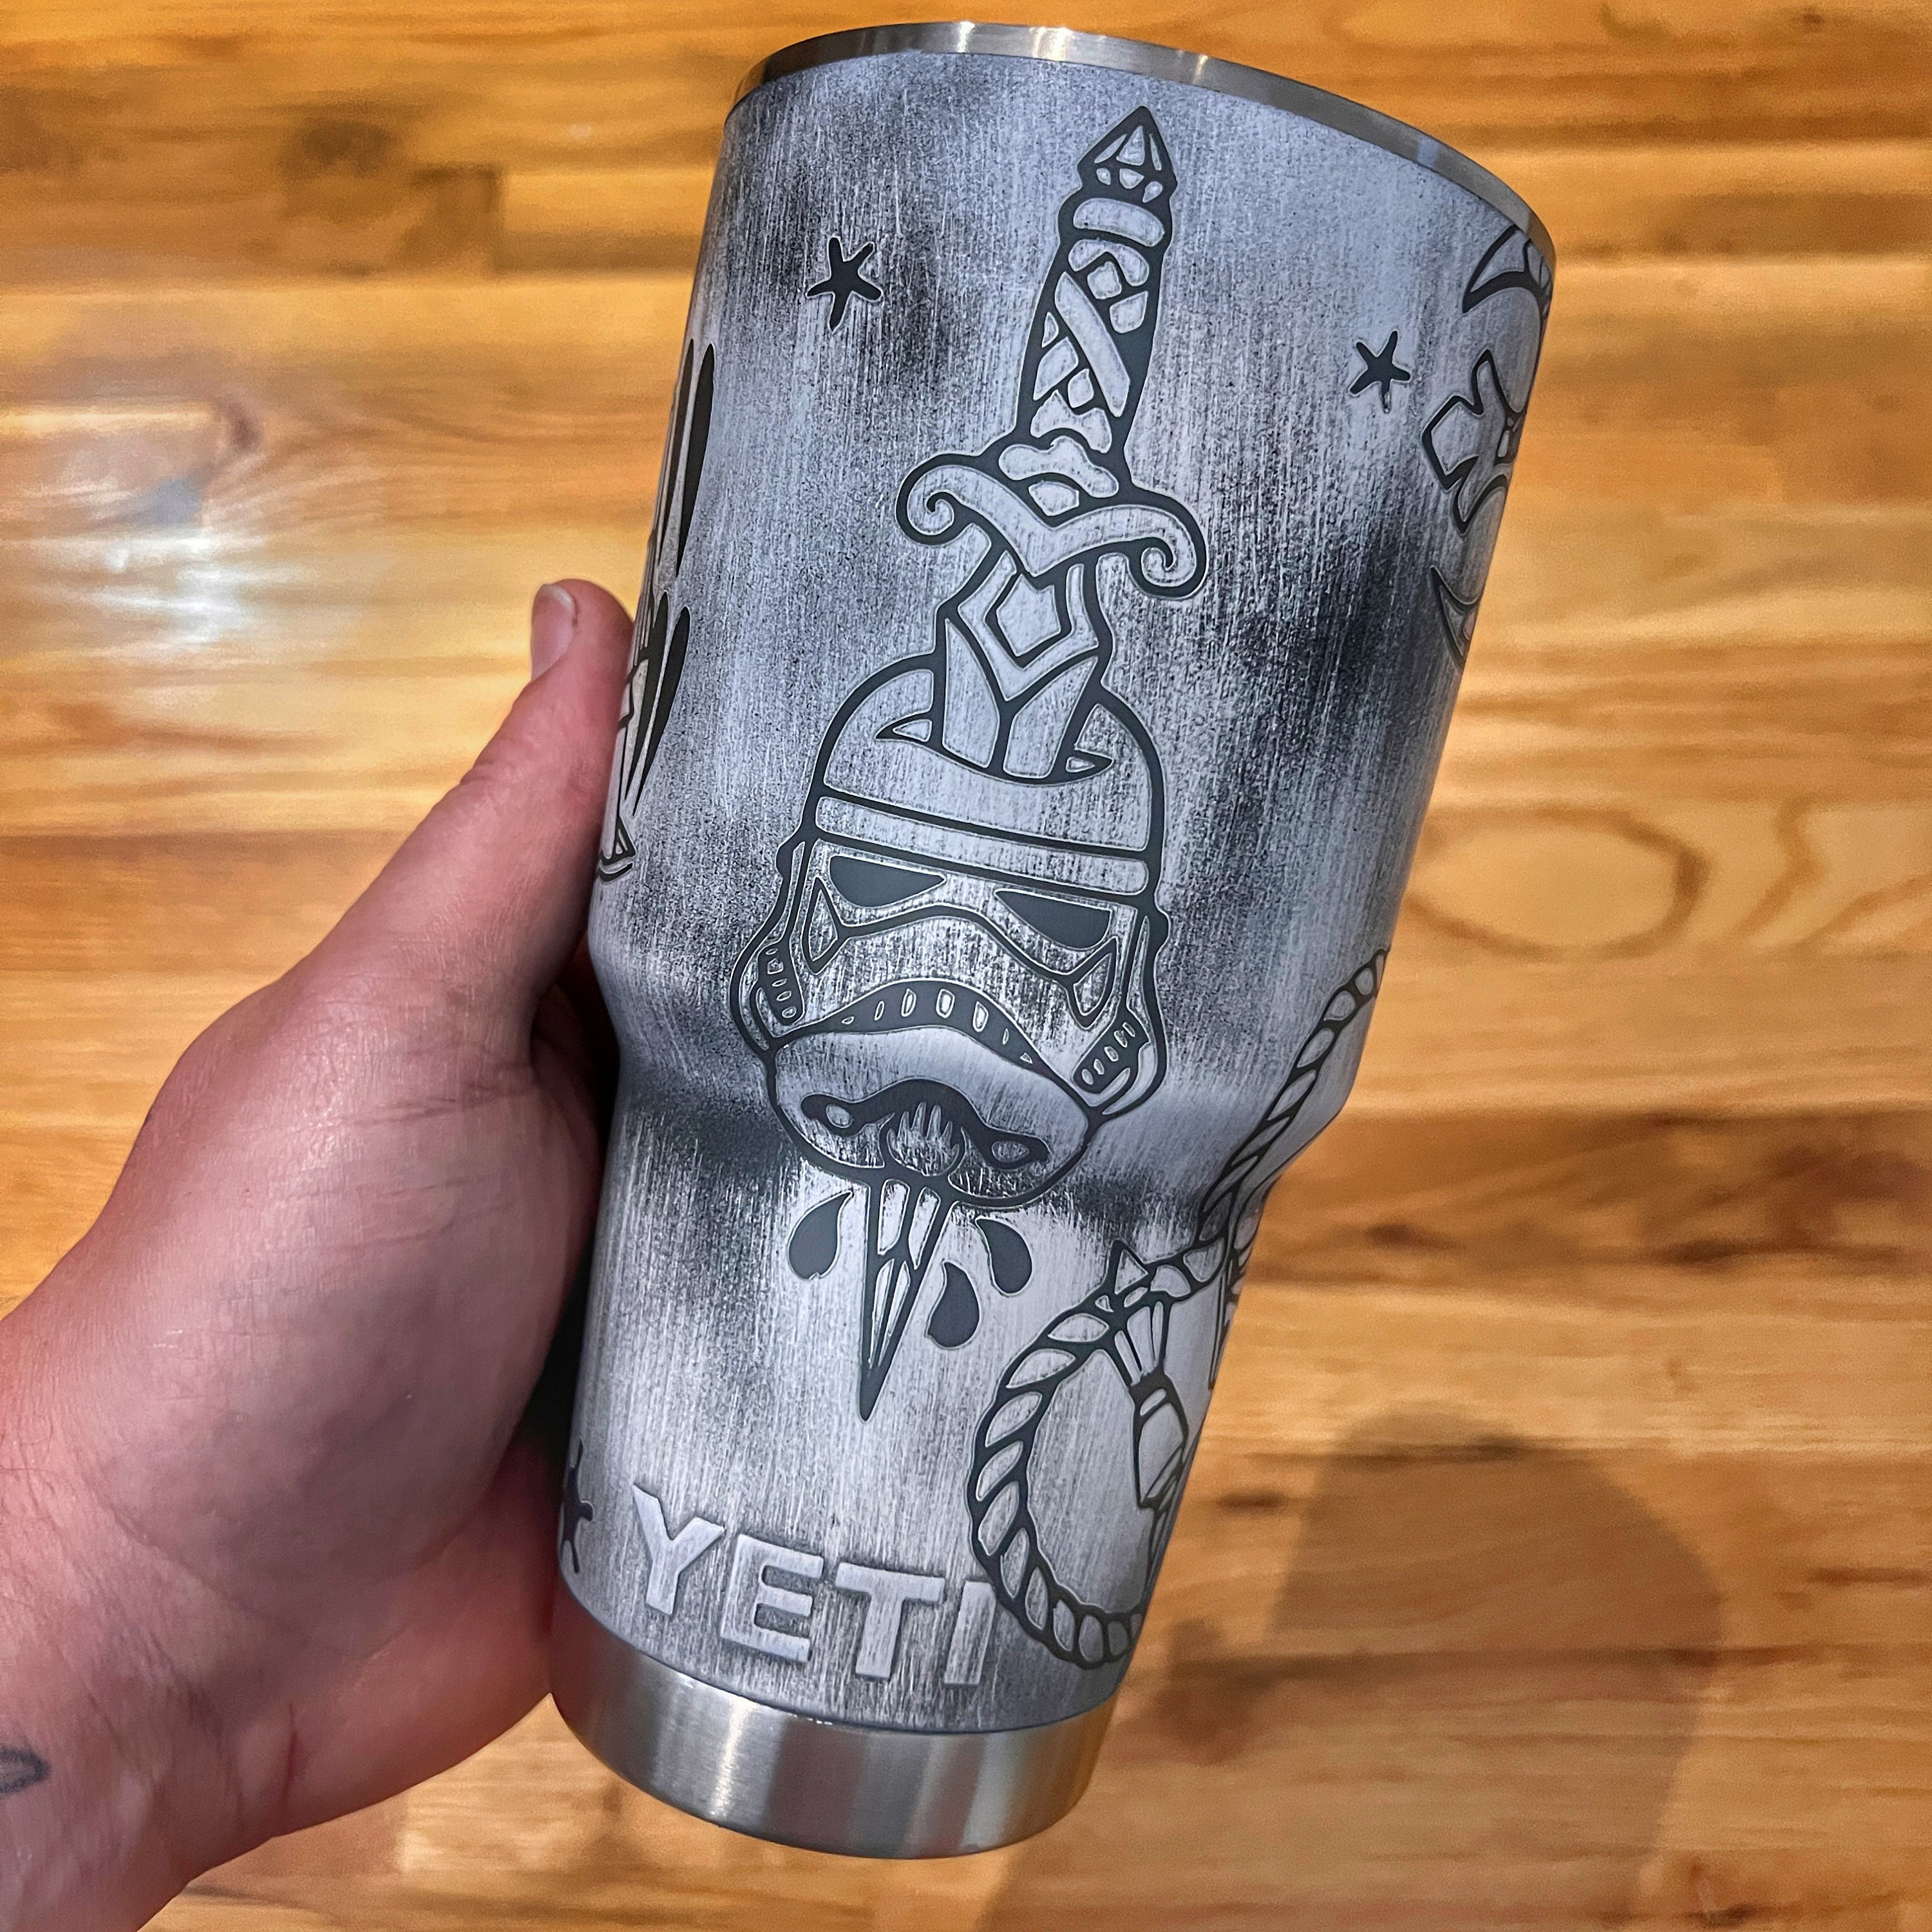 Galaxy Themed Yeti Cup Cerakoted using Parakeet Green and Graphite